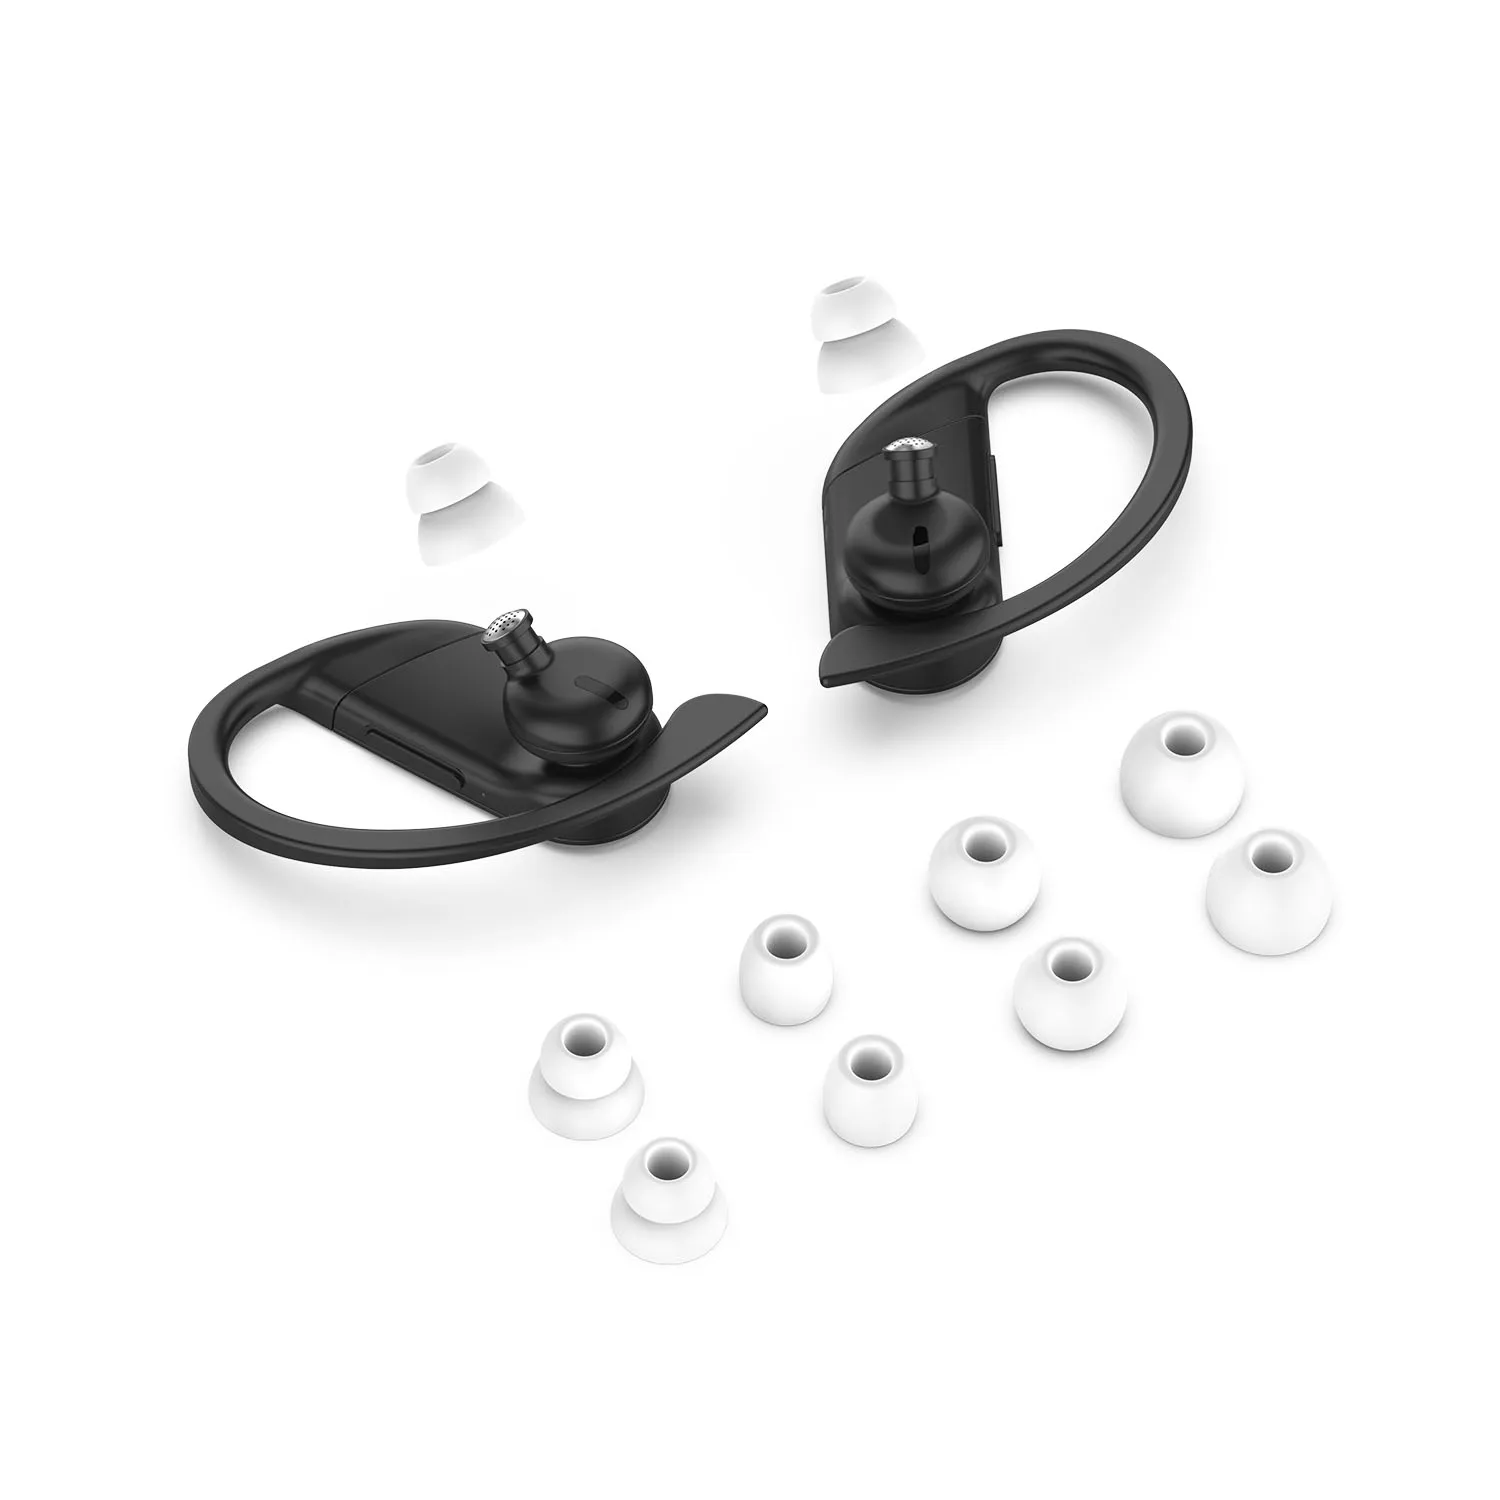 Universal Silicone Earphone Earbuds Bluetooth Headset Waterproof for Beats Powerbeats Pro / 3 Magic Sound Wireless Accessories